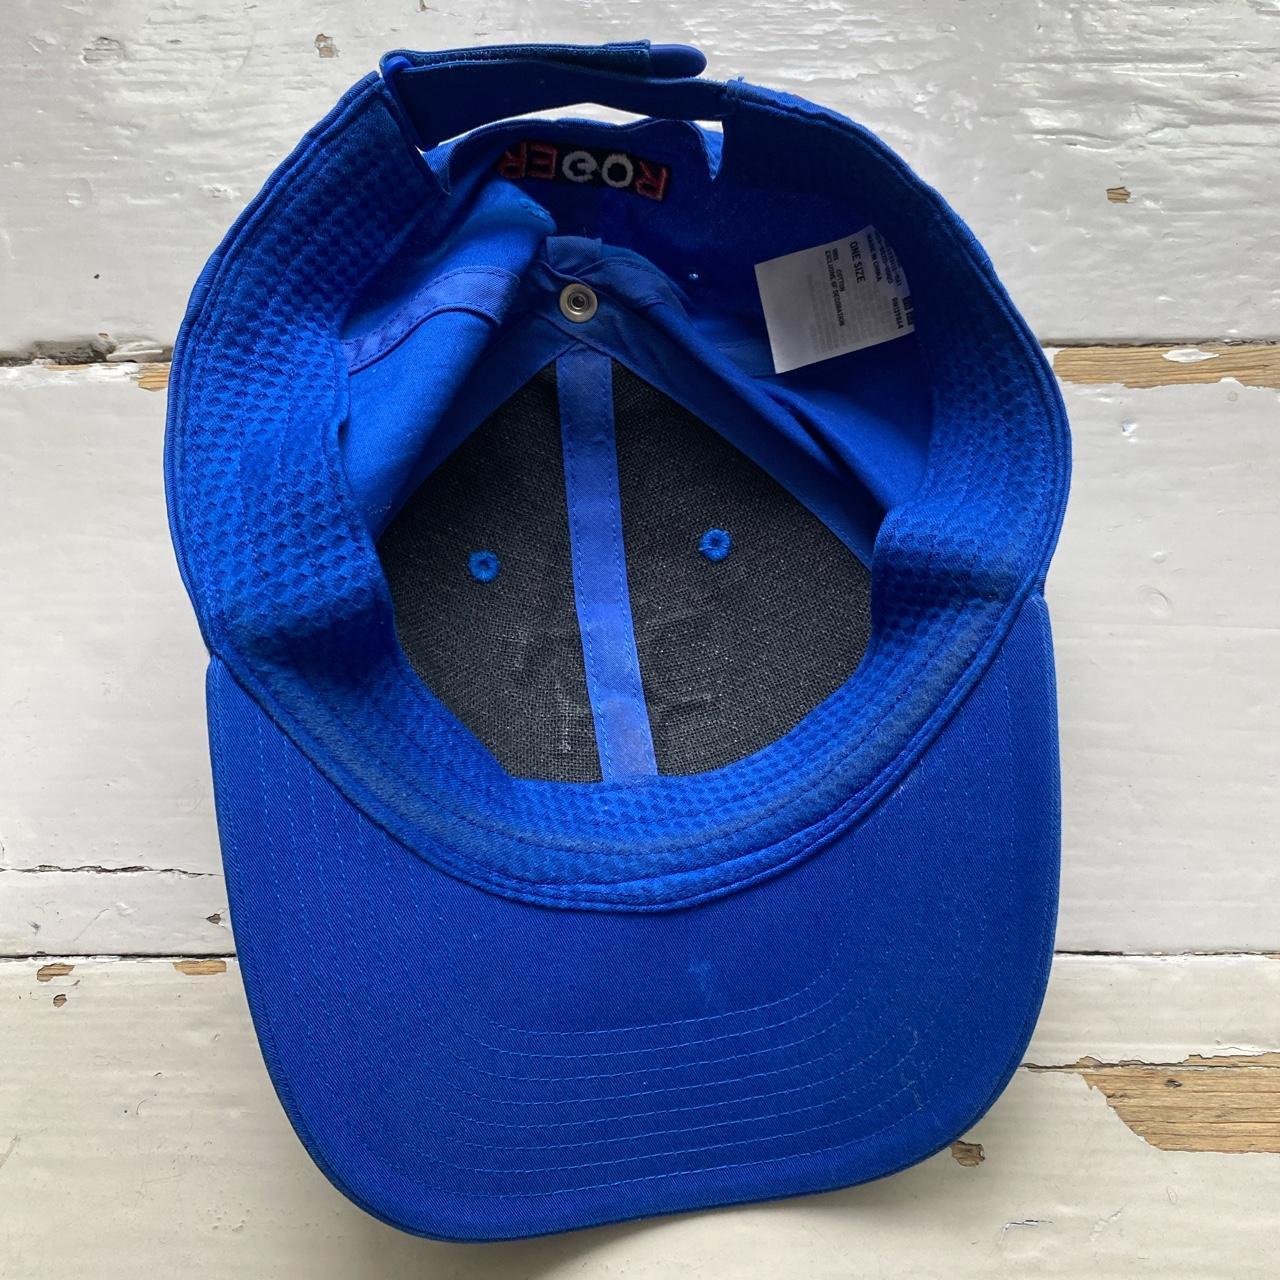 Roger Federer Uniqlo Blue and White Tennis Cap